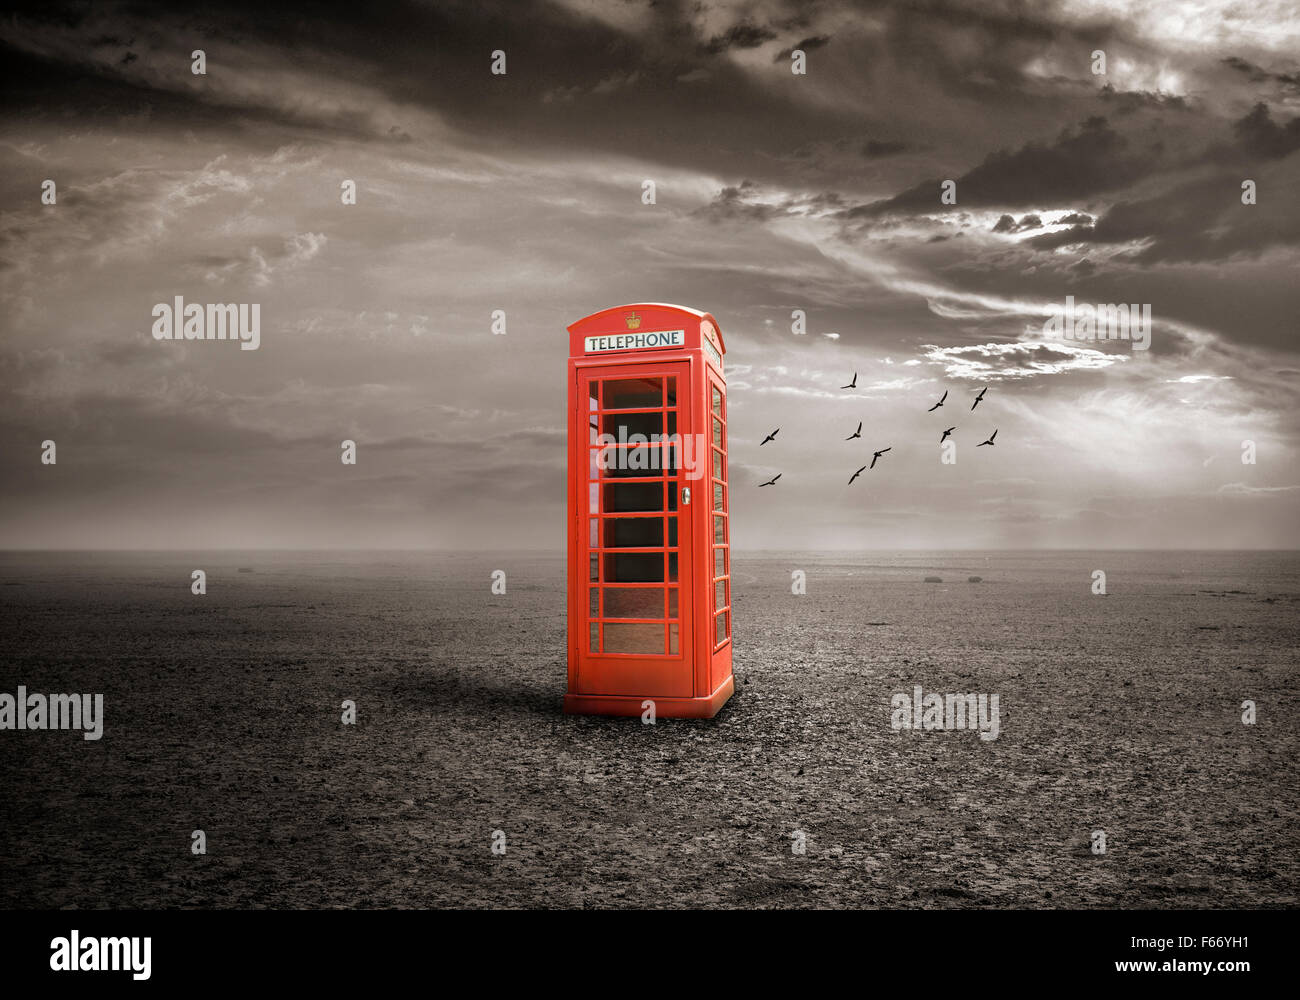 Old-fashioned traditional red telephone booth on deserted field Stock Photo